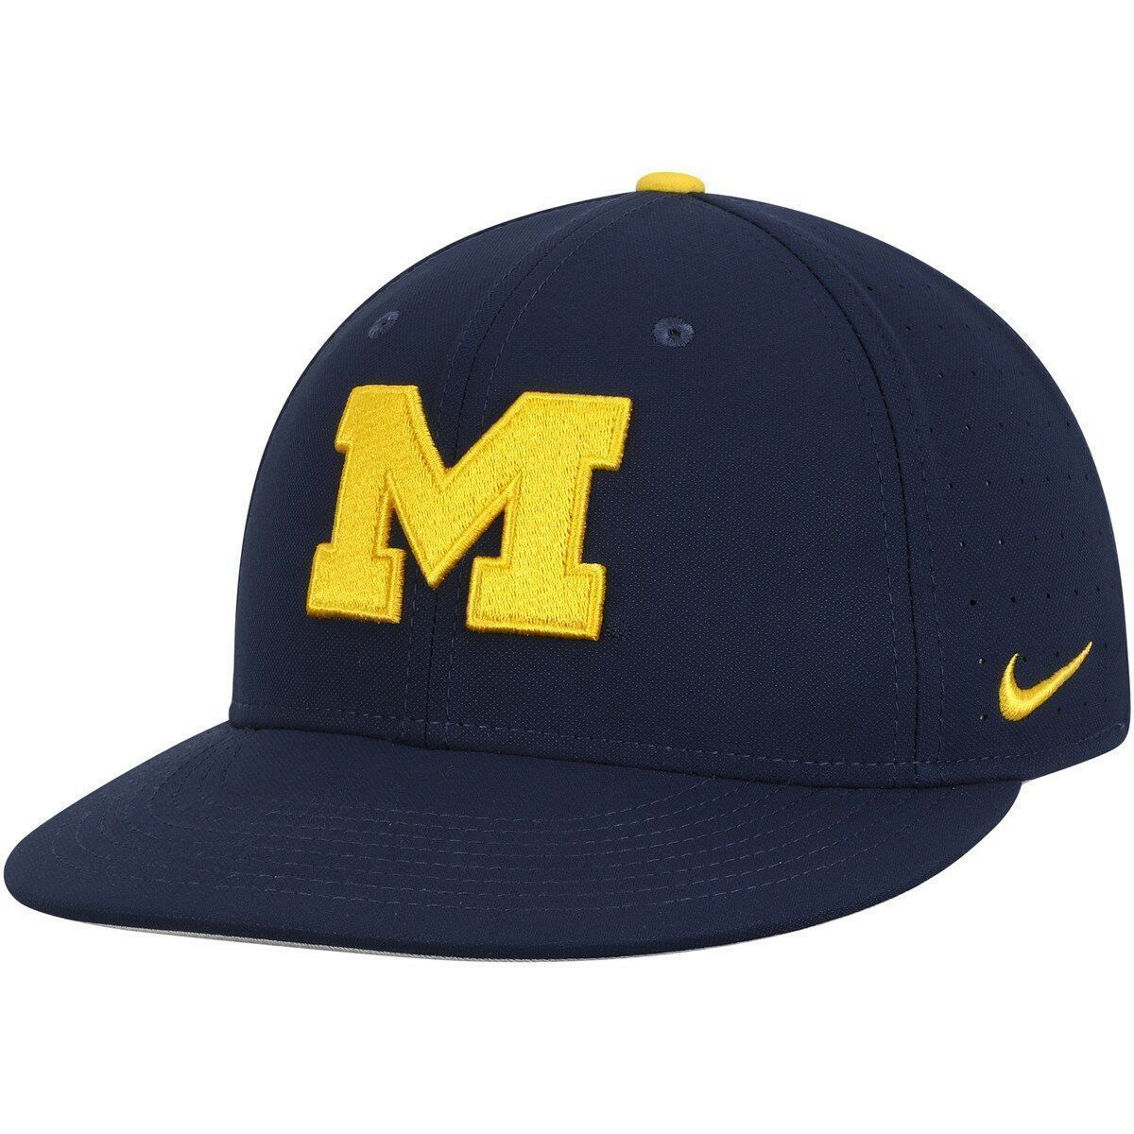 Nike Men's Navy Michigan Wolverines Aerobill Performance True Fitted Hat - Image 2 of 4